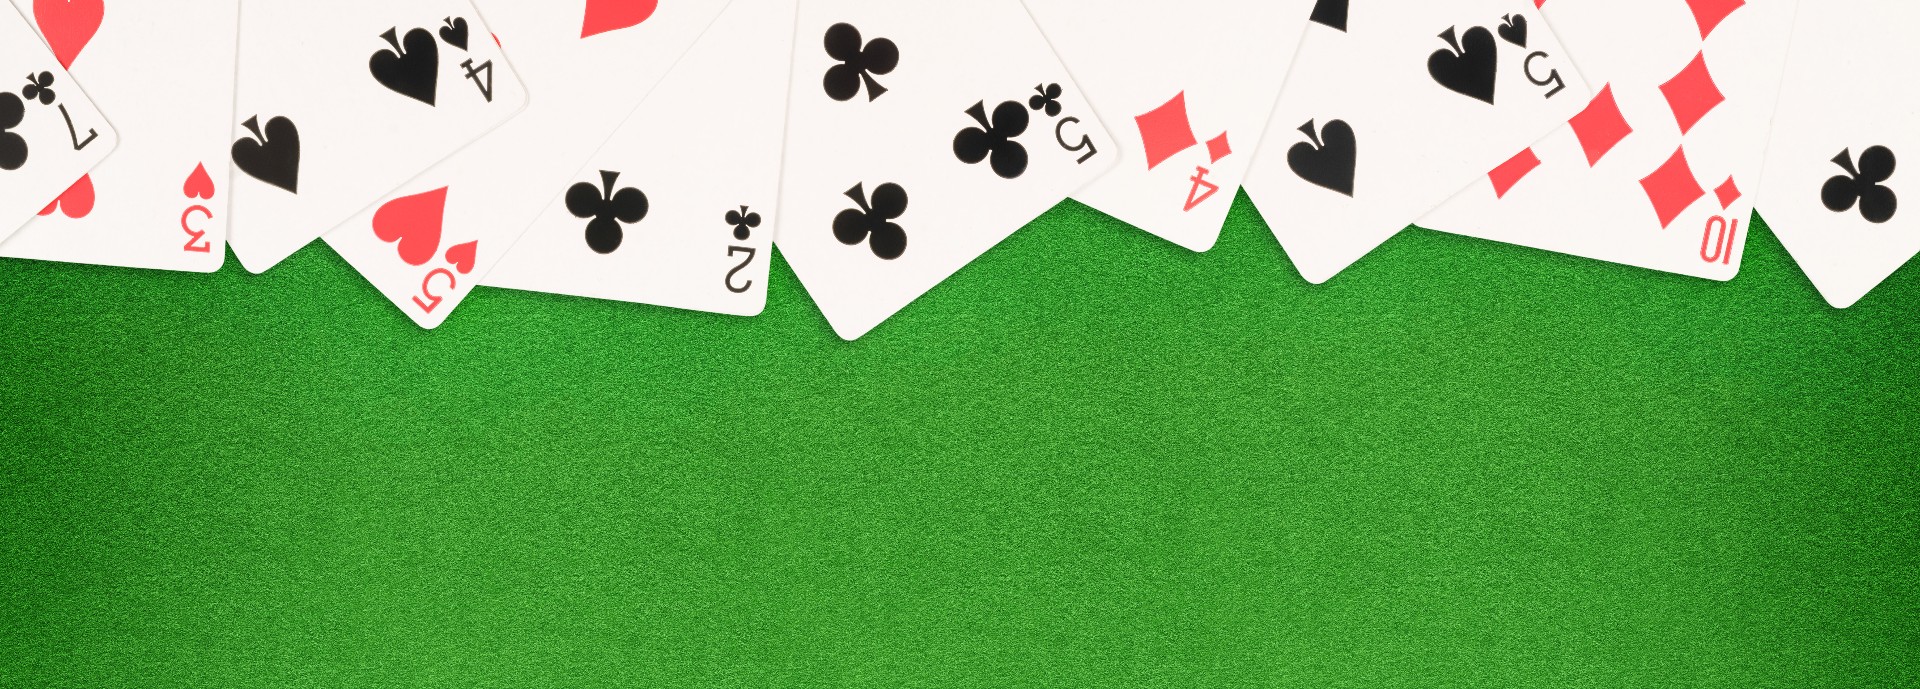 Playing cards spread out on a green felt background